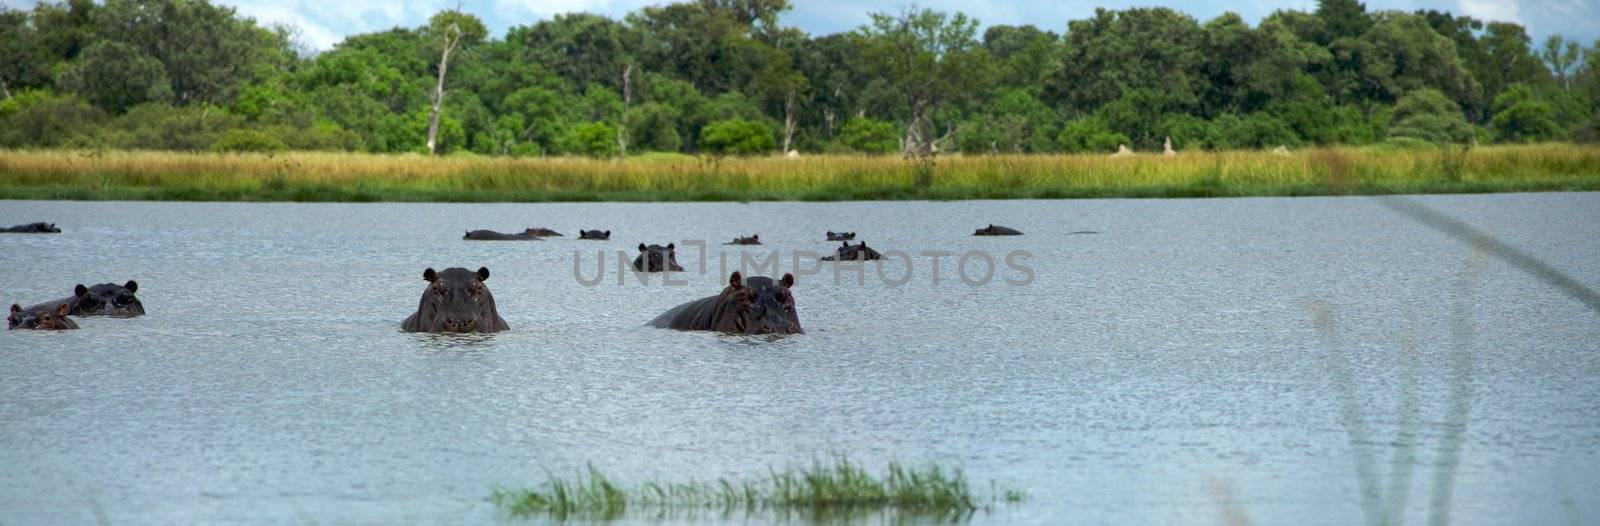 Hippos Rearing by watchtheworld